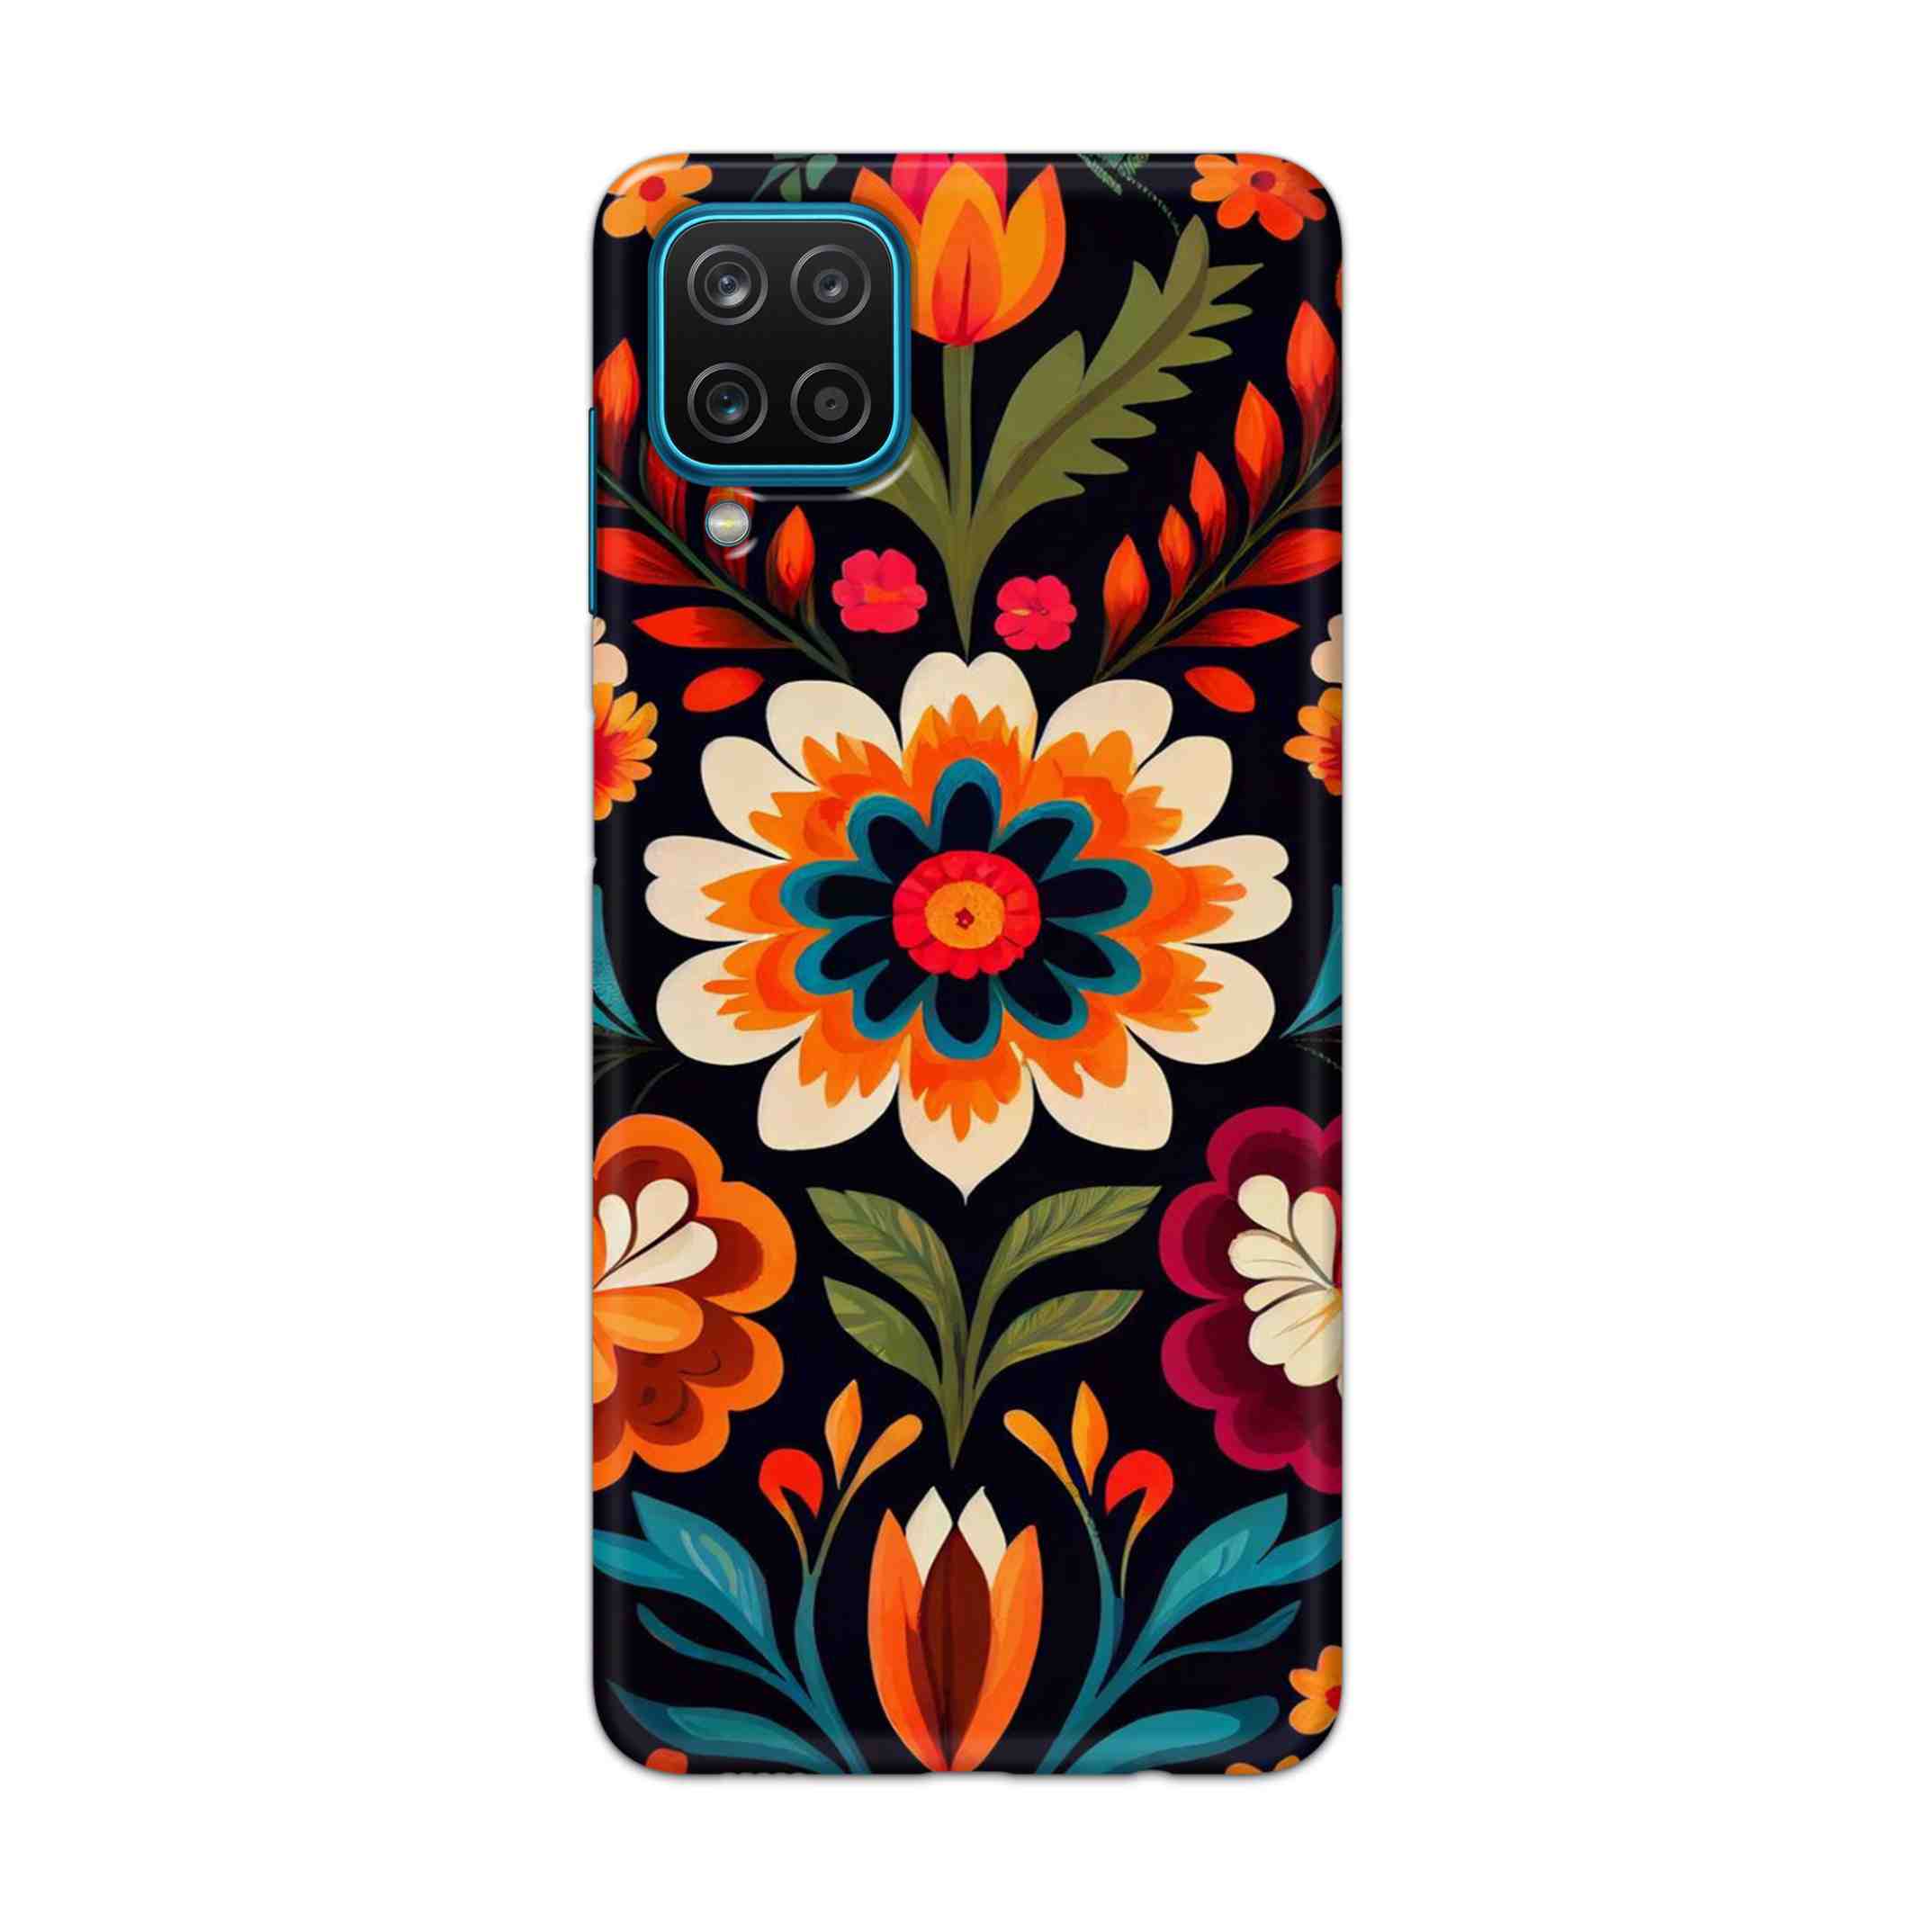 Buy Flower Hard Back Mobile Phone Case Cover For Samsung Galaxy A12 Online